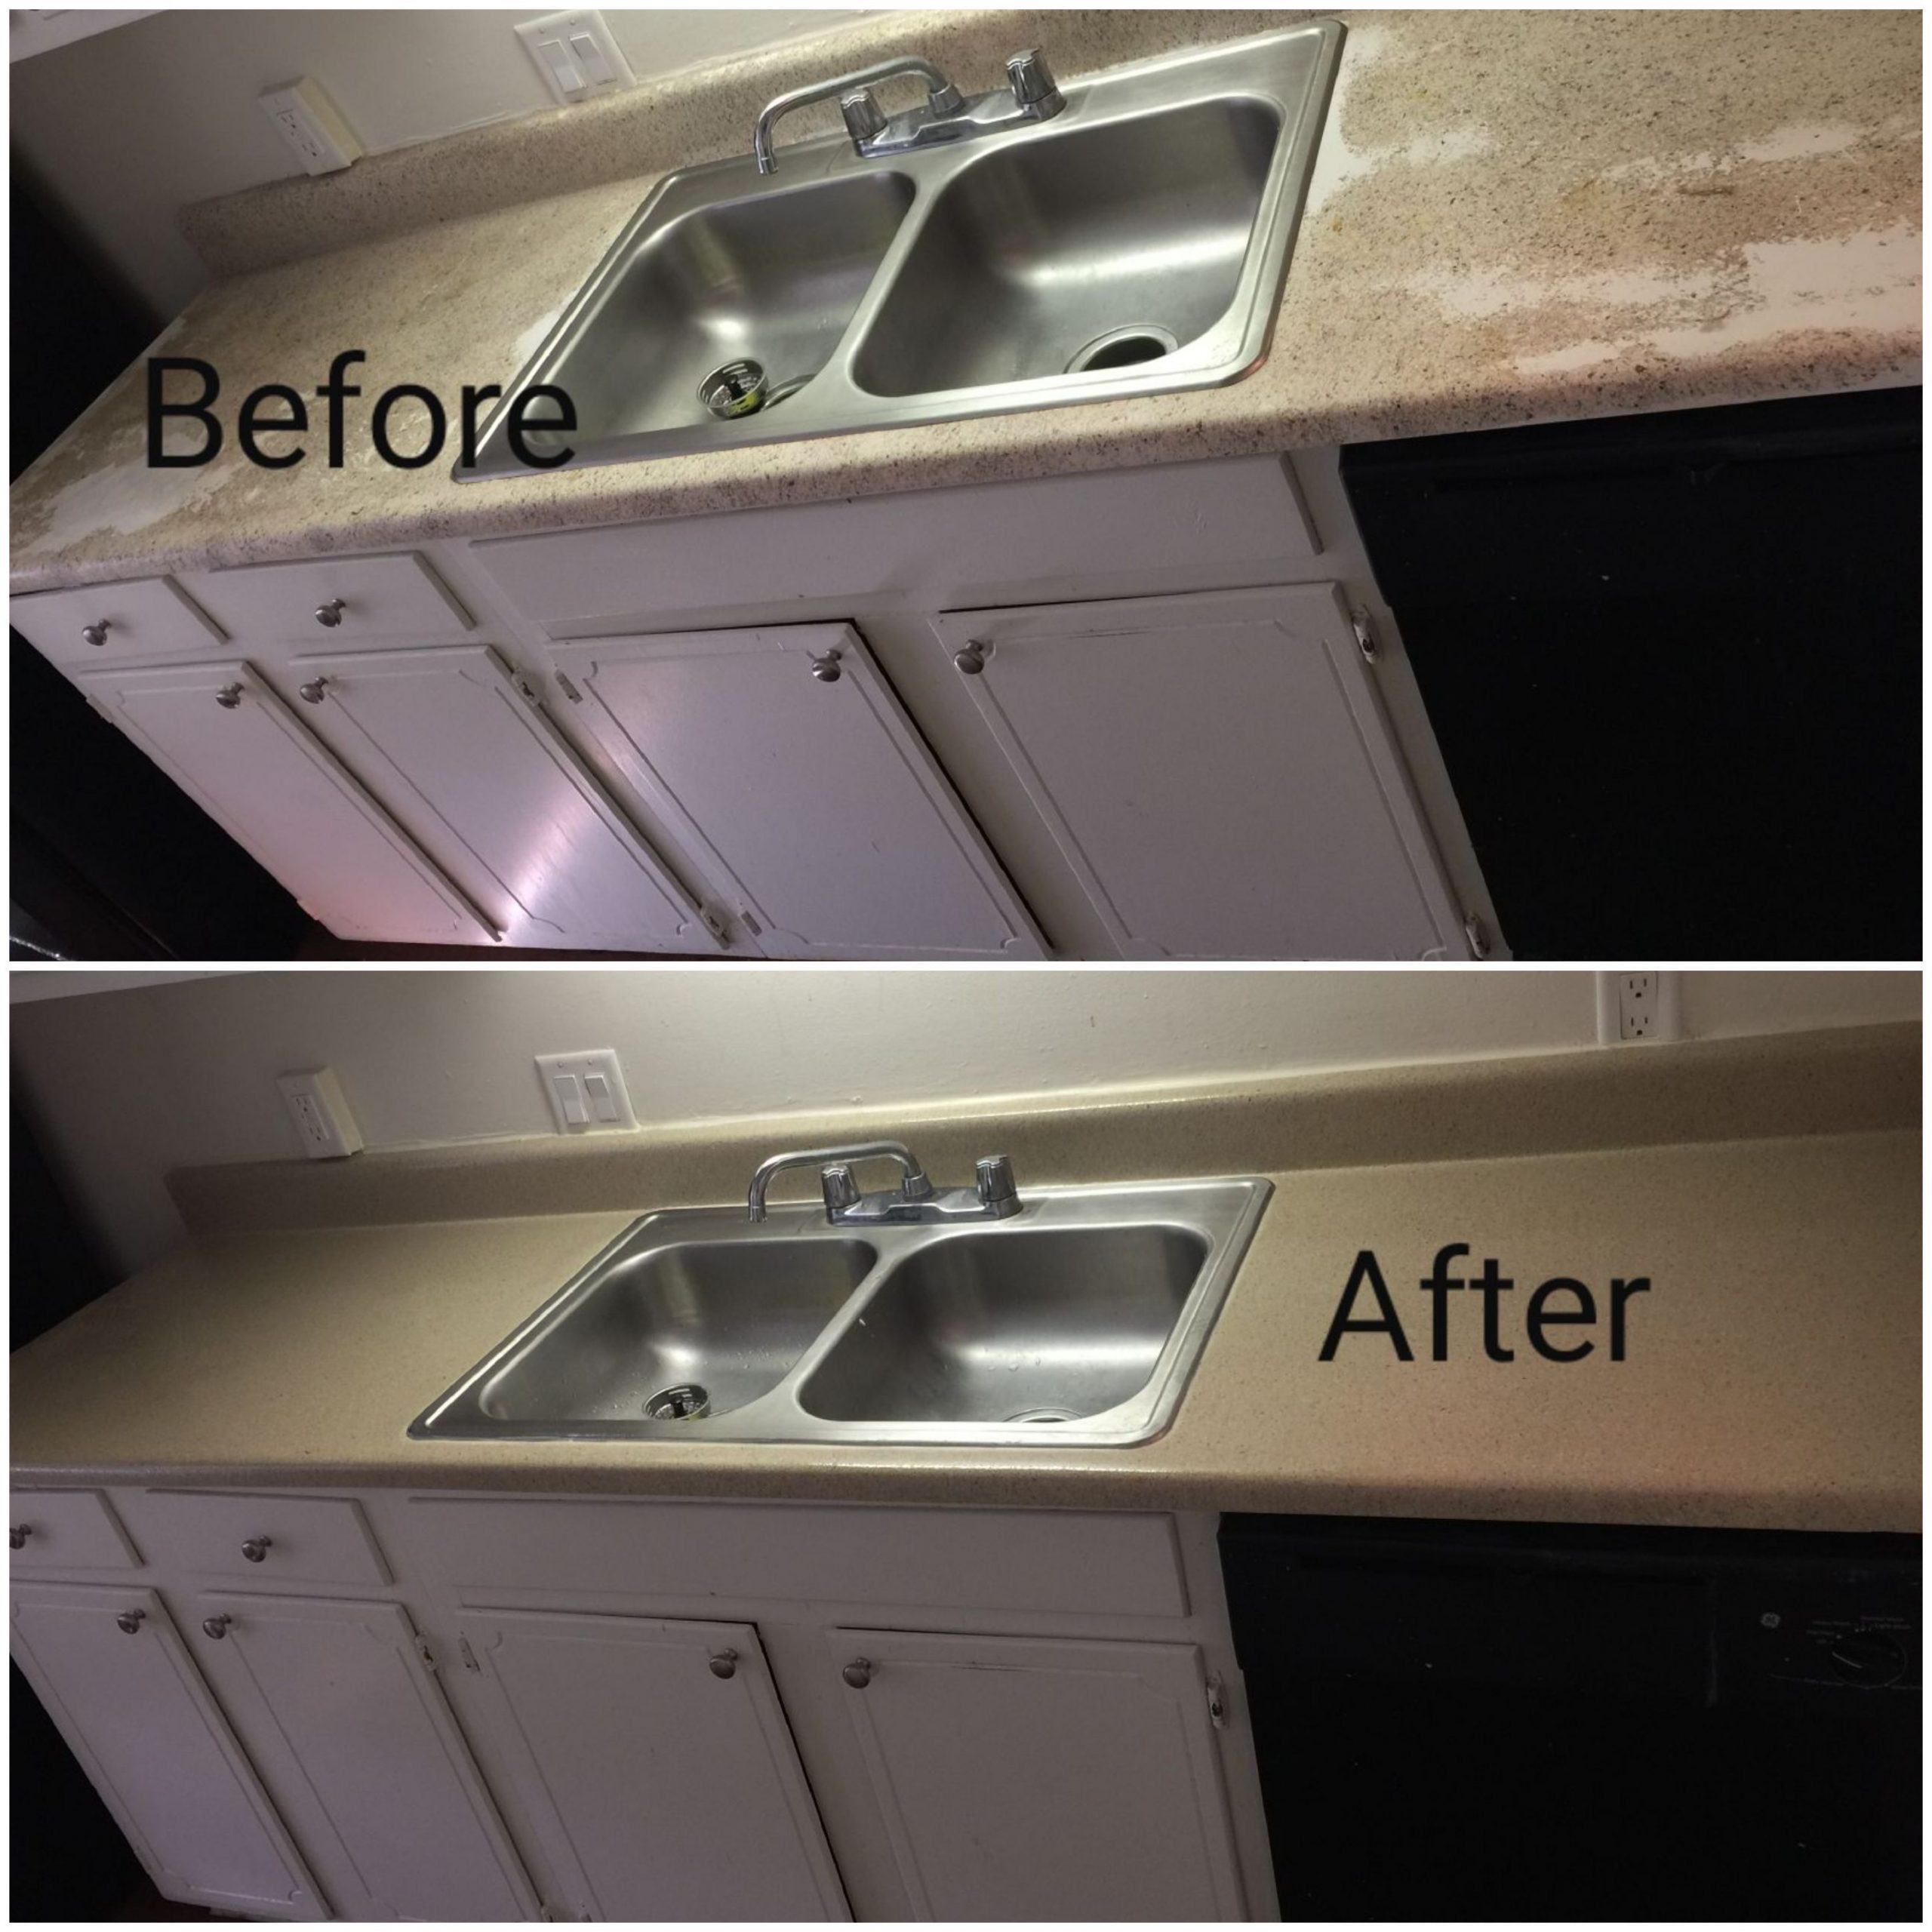 Countertop Refinishing - Sparkle Cleaning Solutions & Refinishing